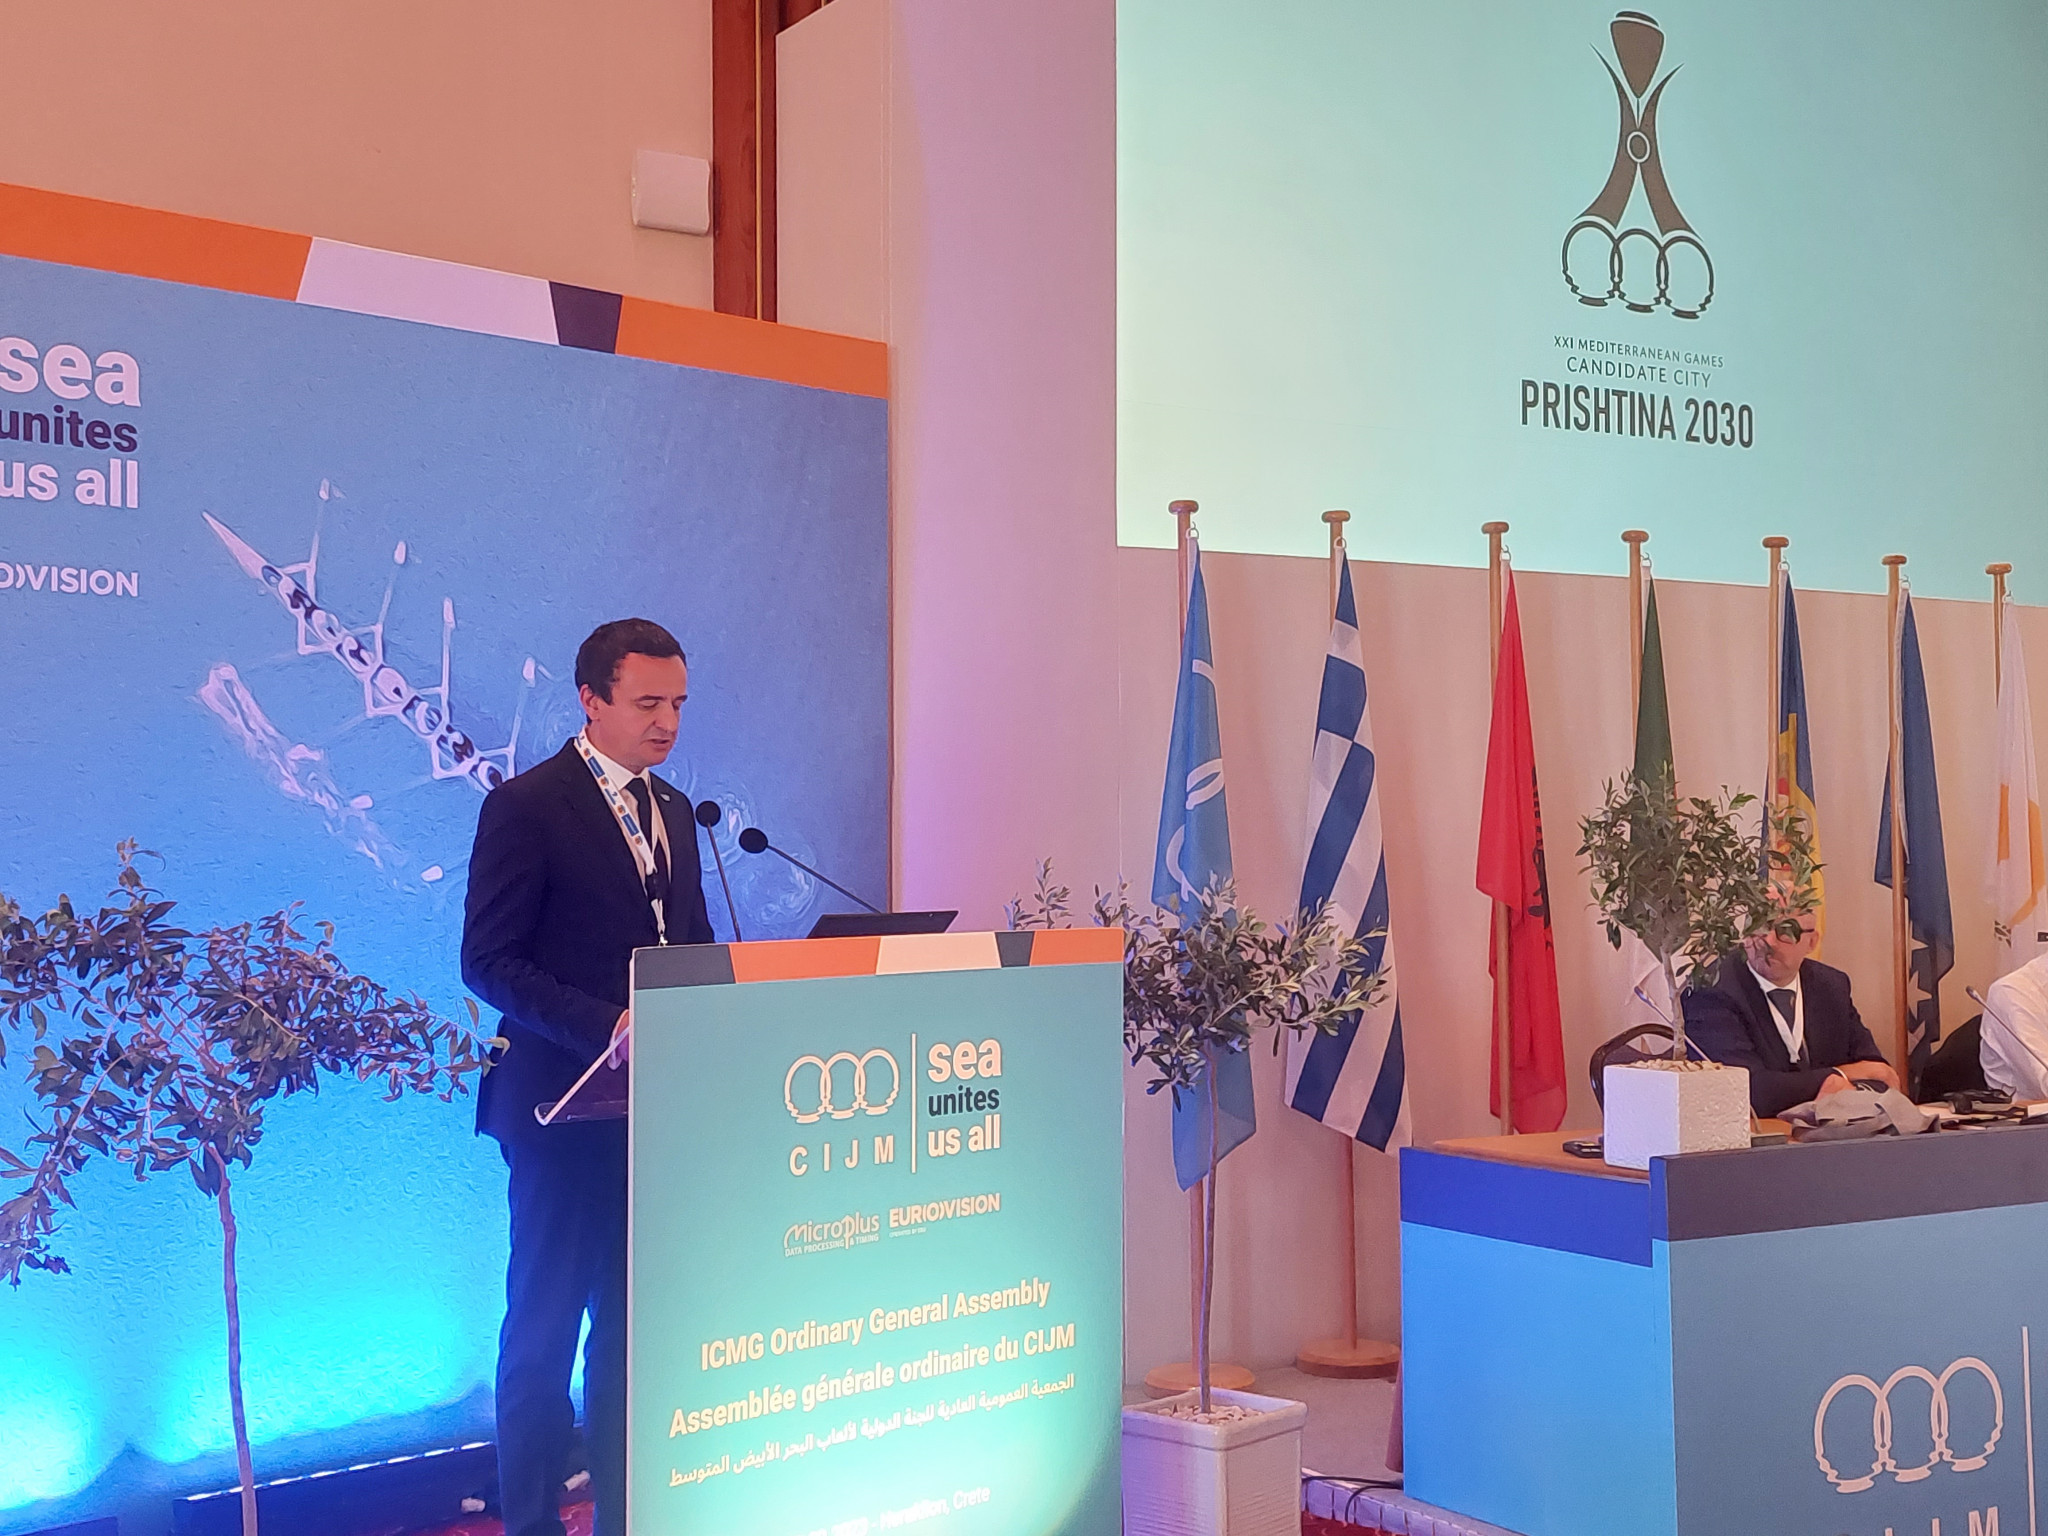 Kosovo's Prime Minister Αlbin Kurti spoke at the ICMG General Assembly as Pristina was awarded the hosting rights for the 2030 Mediterranean Games ©ICMG